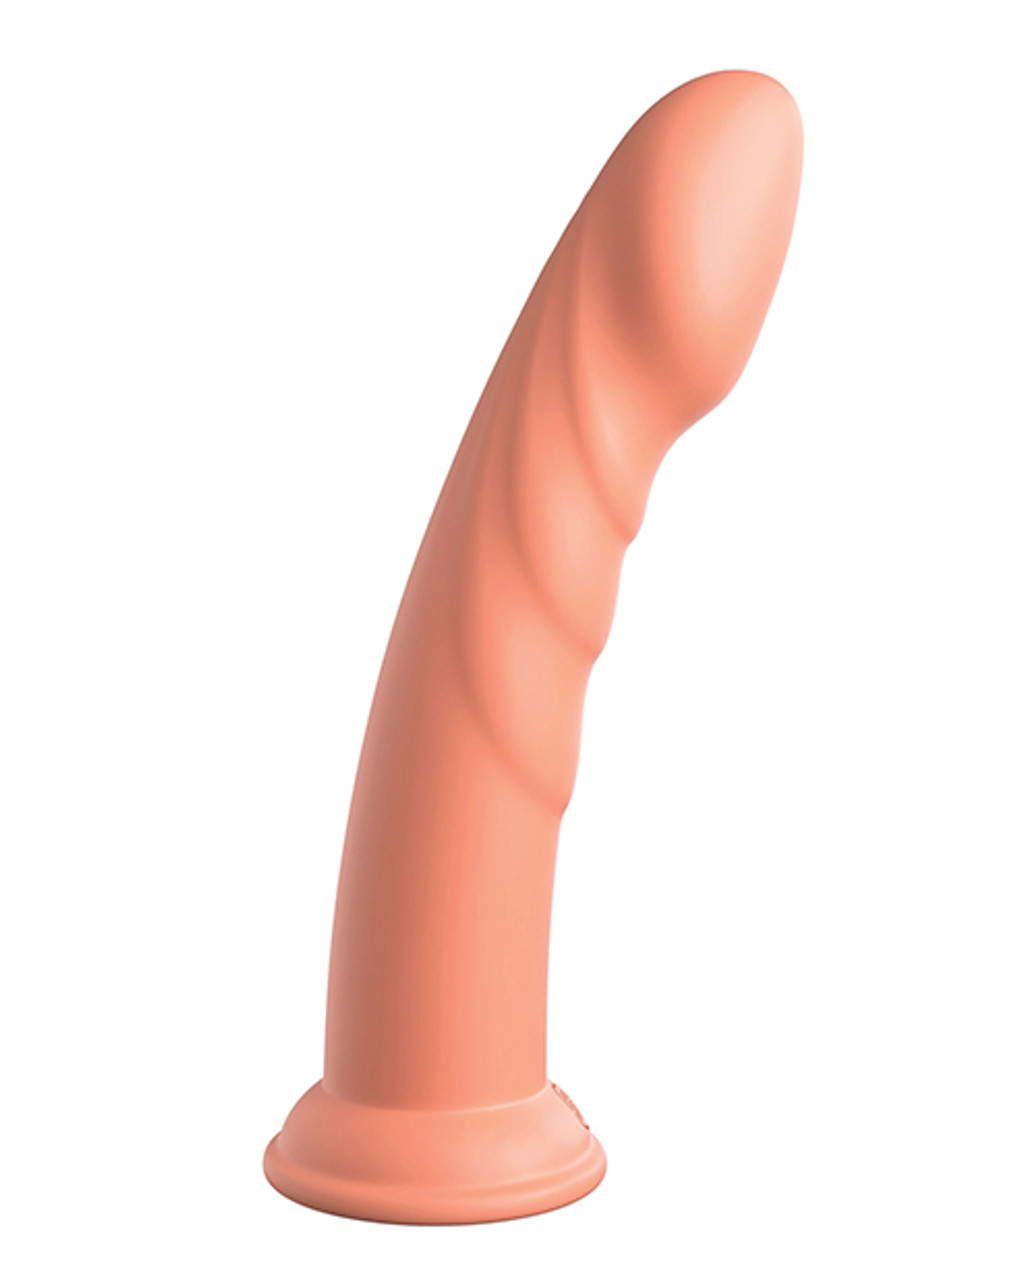 Platinum Super Eight Dildo | 8 inch | Buy strap on dildos for pegging online from Condom Depot